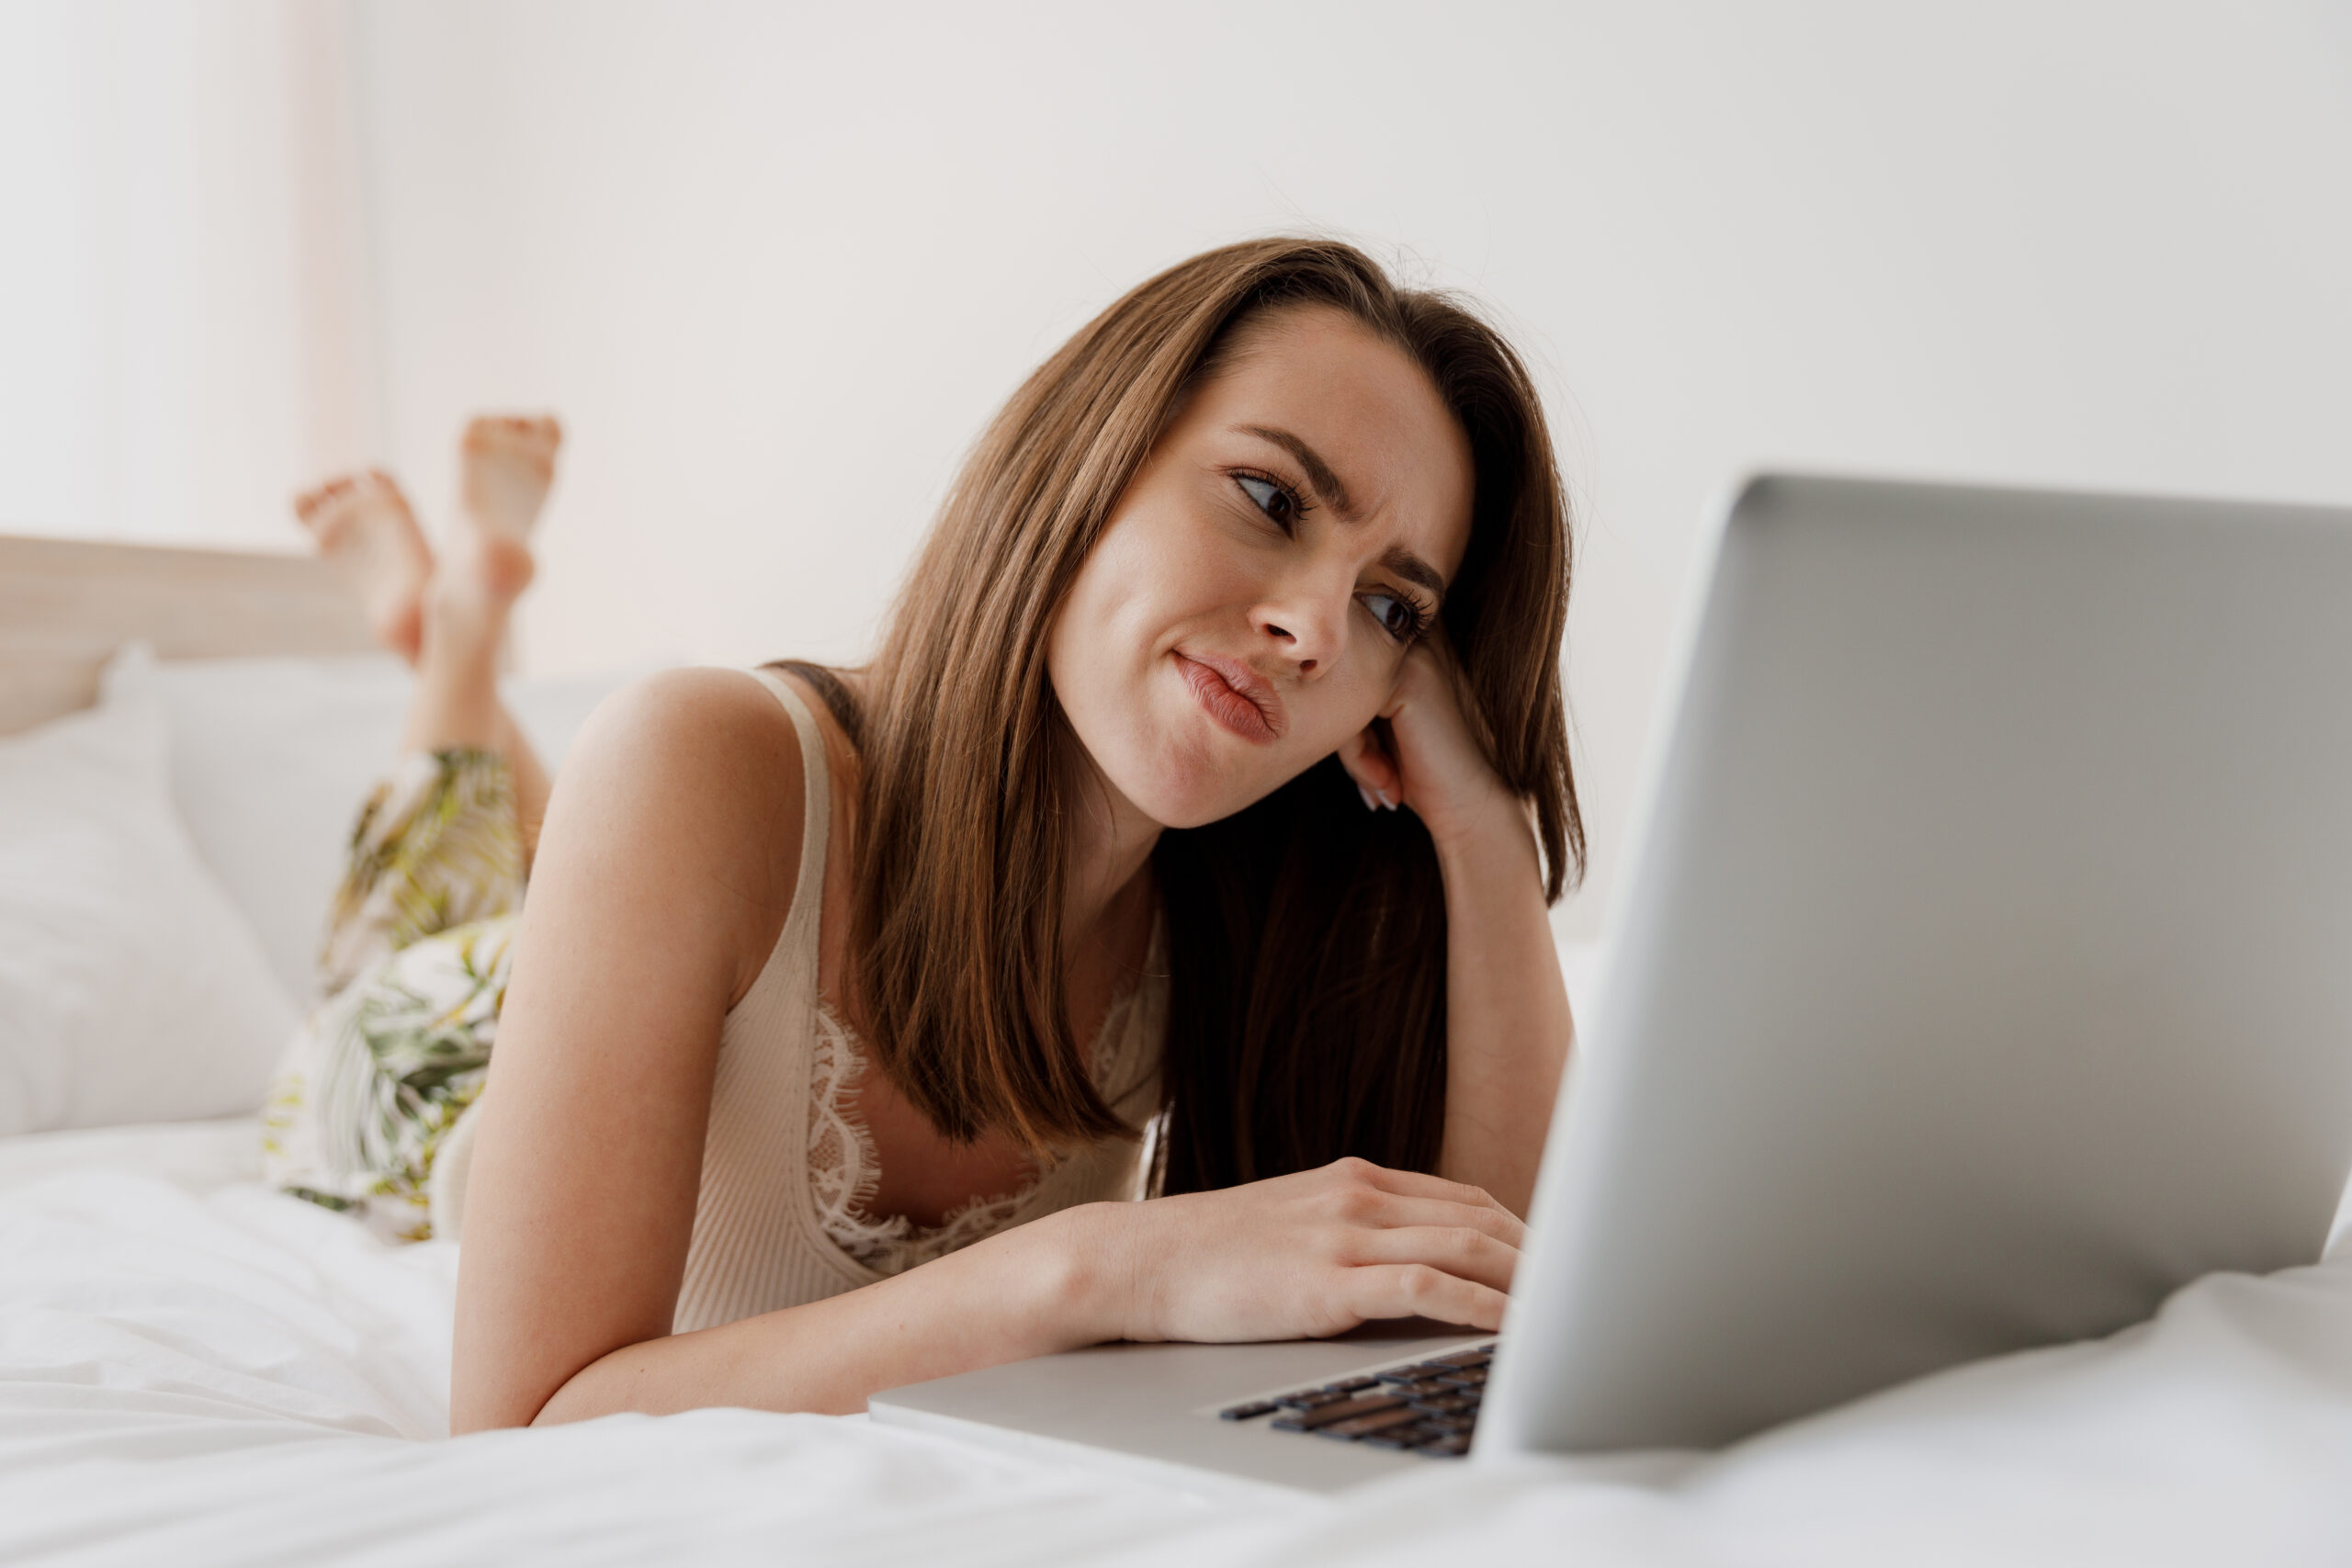 pensive young woman with funny expression lying on her stomach in bed using a laptop